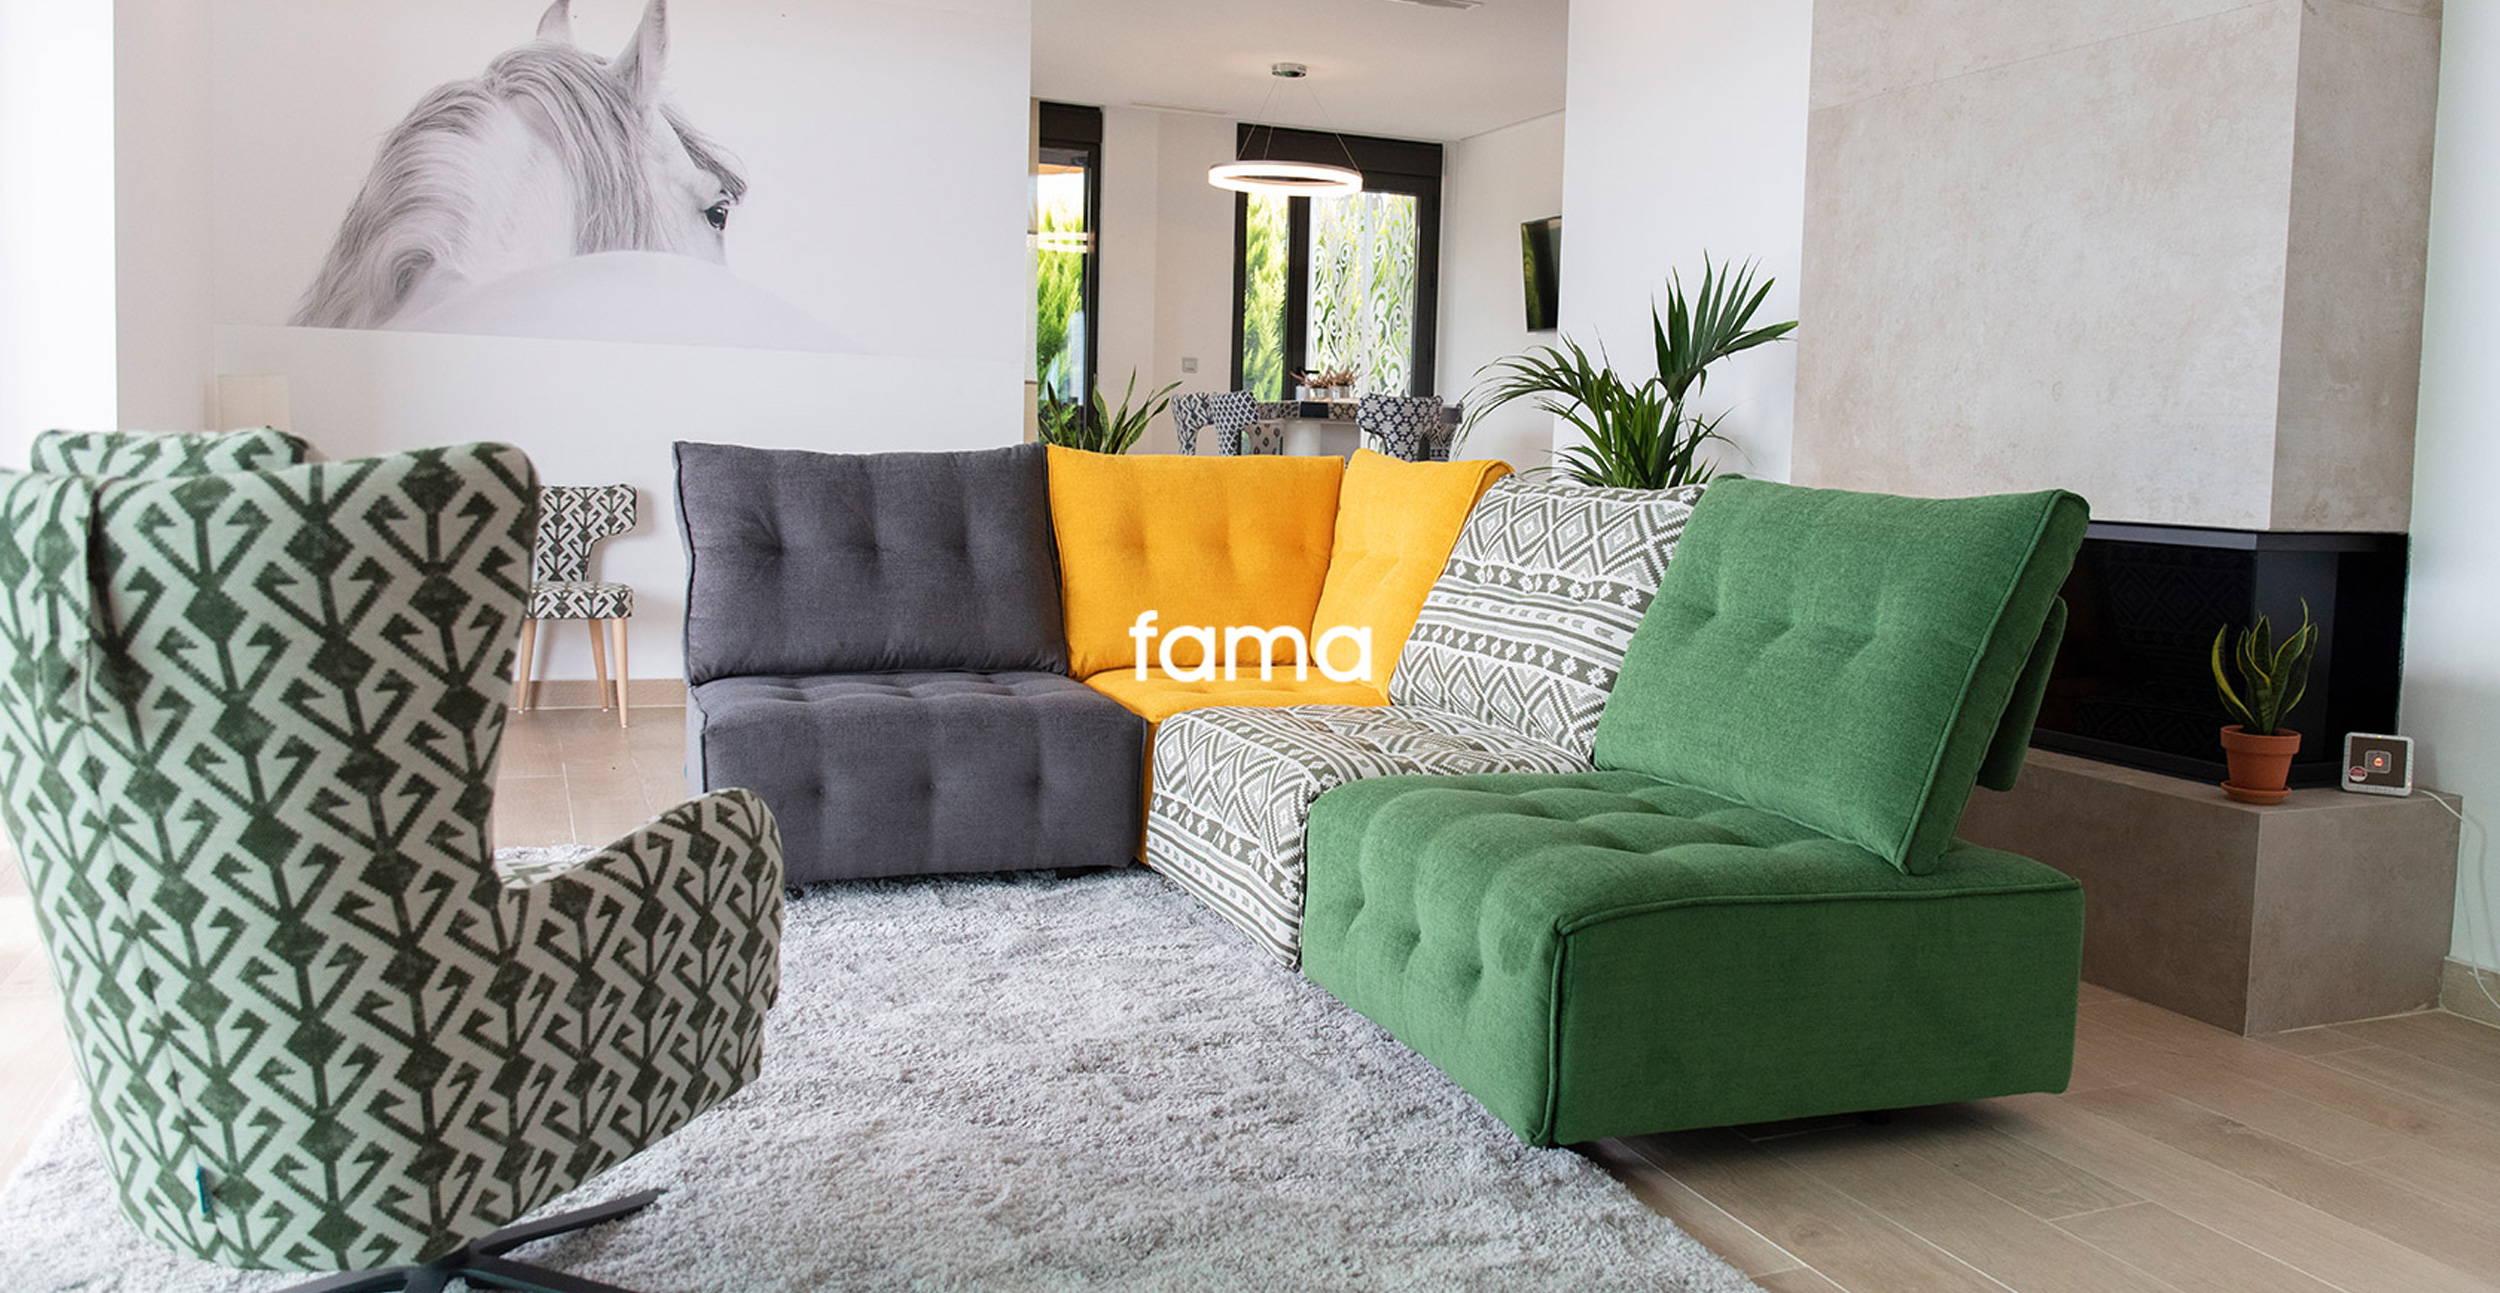 Fama Sofas At BF Home In Norwich